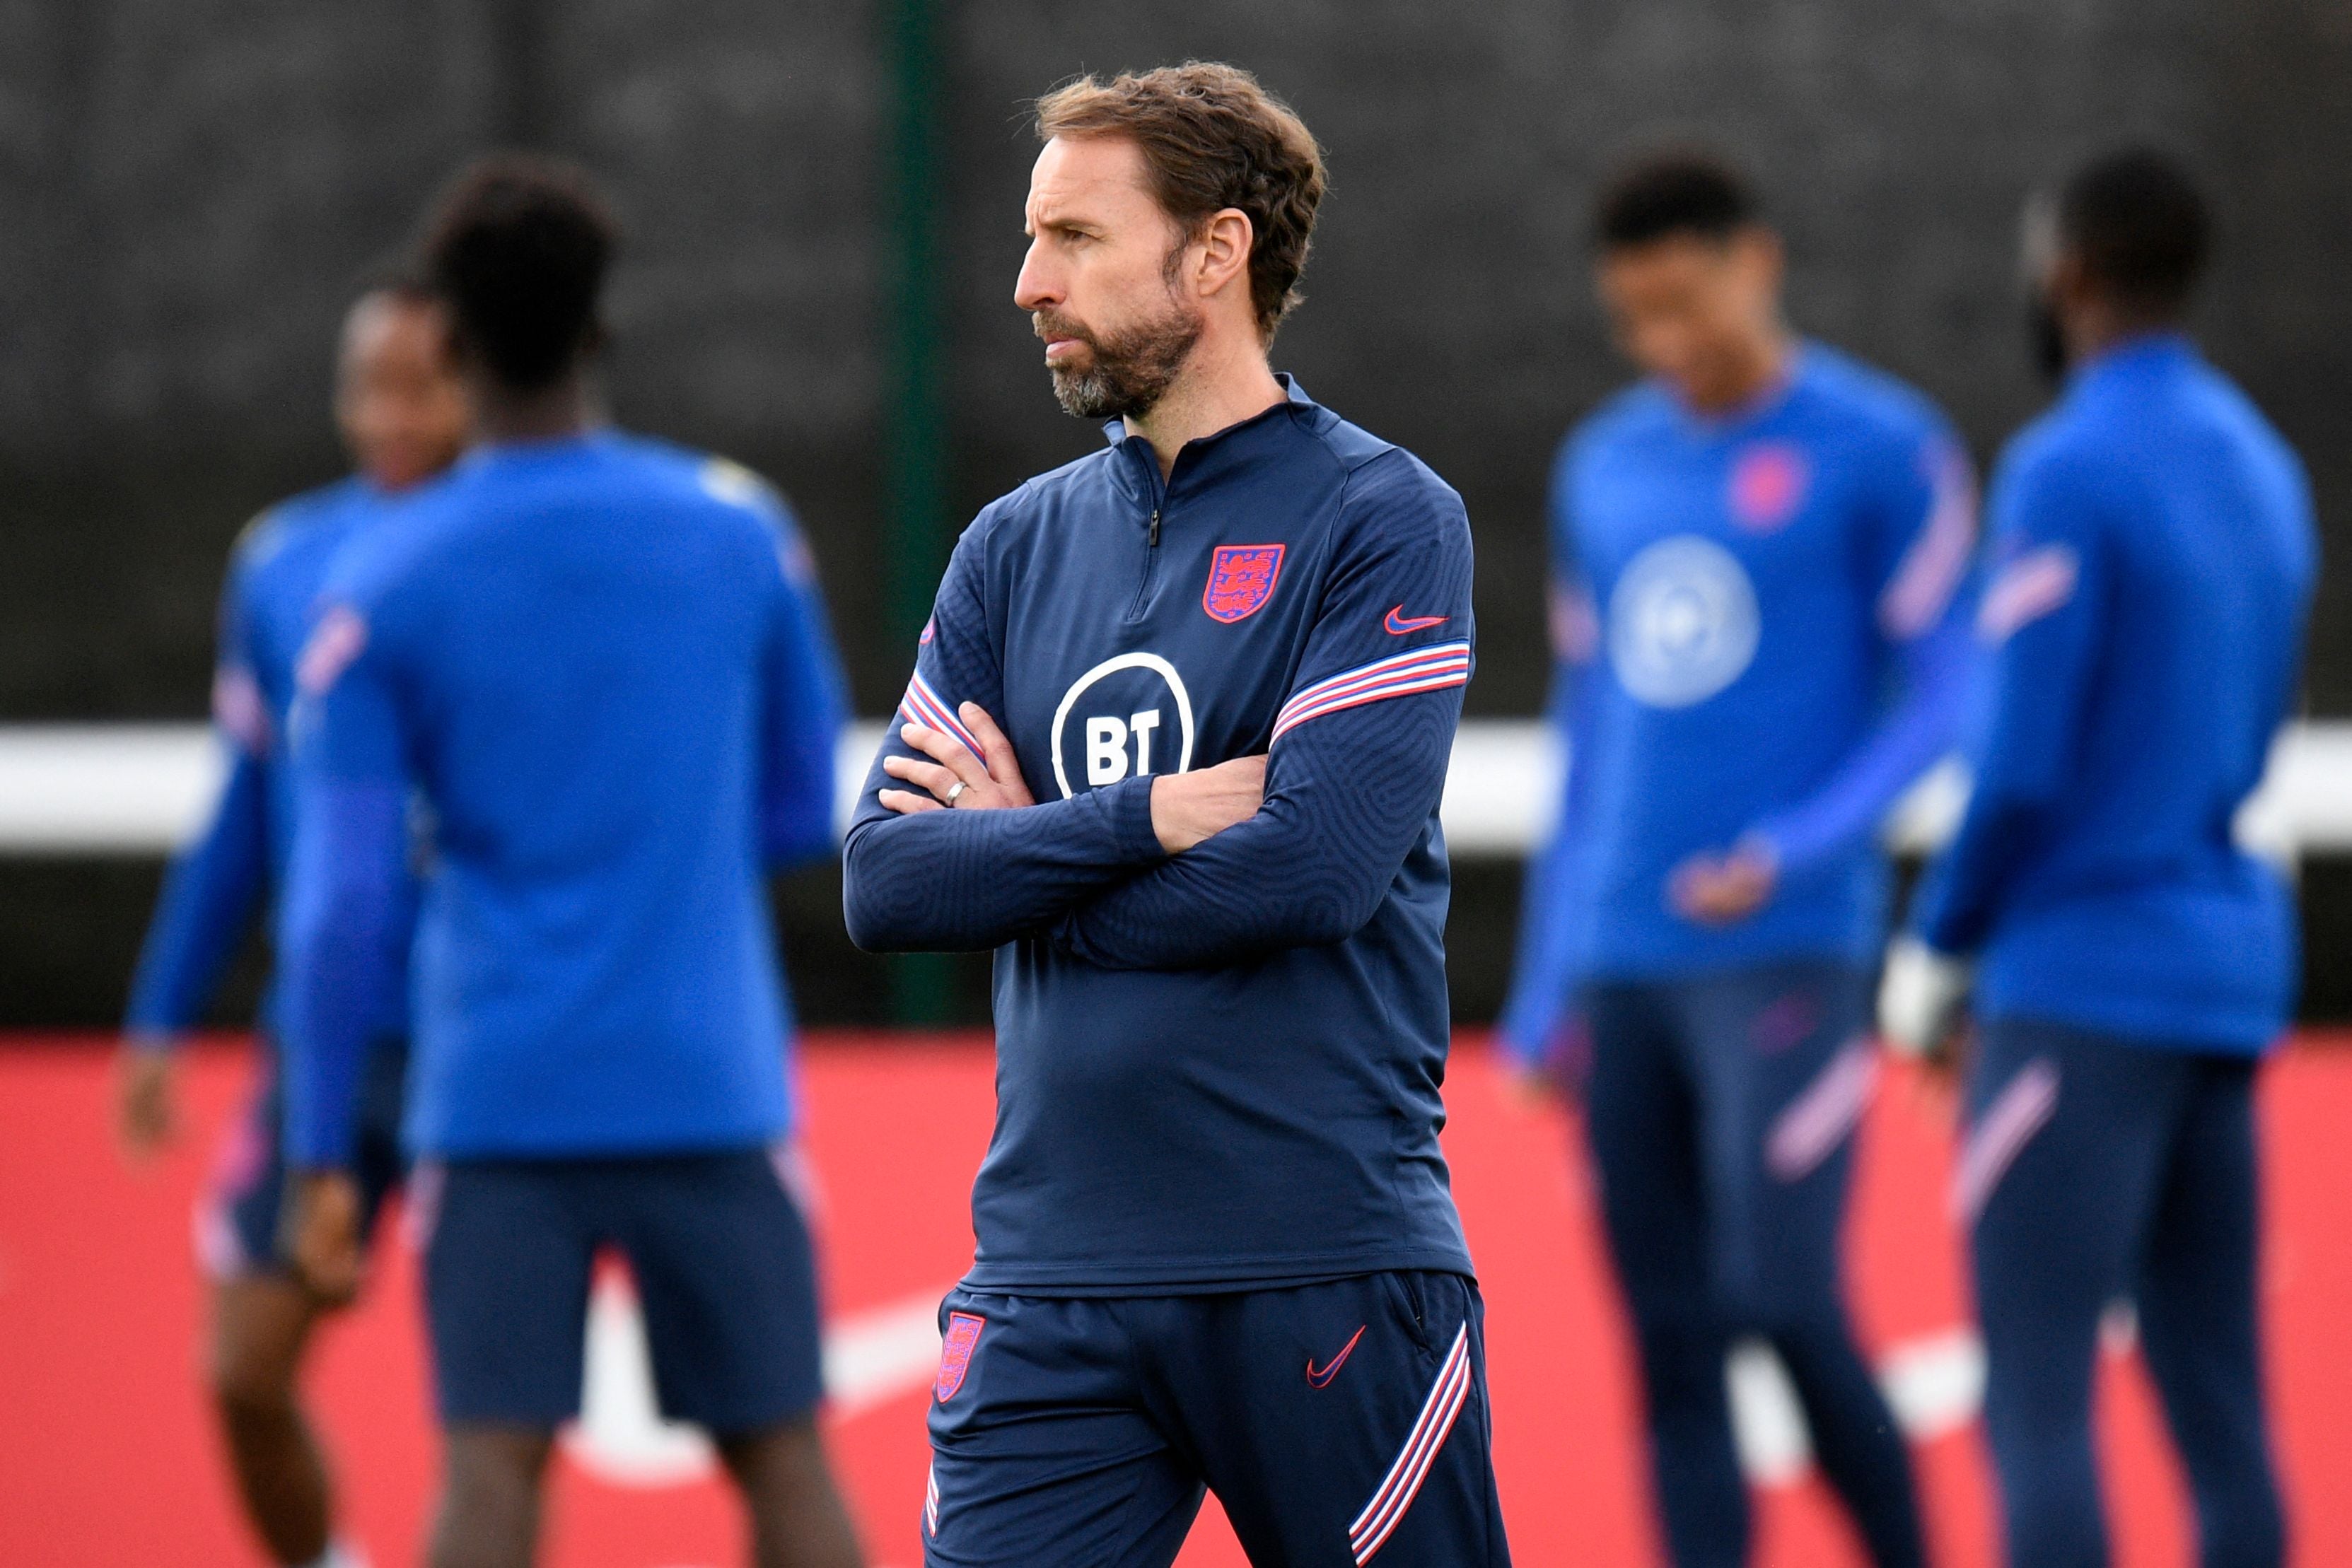 Southgate will soon name his squad for Qatar